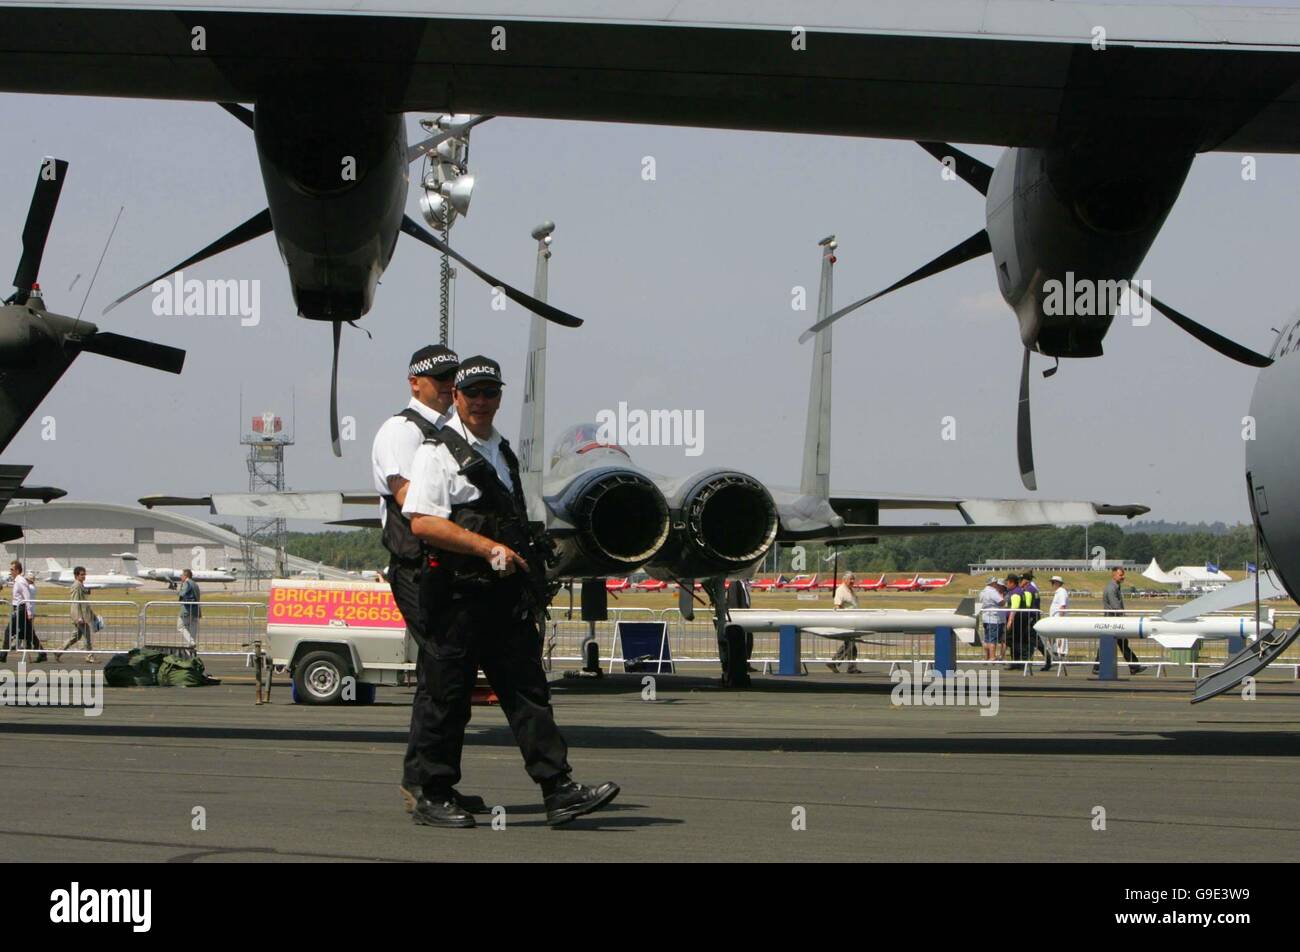 Armed police guard the static aircraft display at the Farnborough International Airshow in Hampshire. Stock Photo